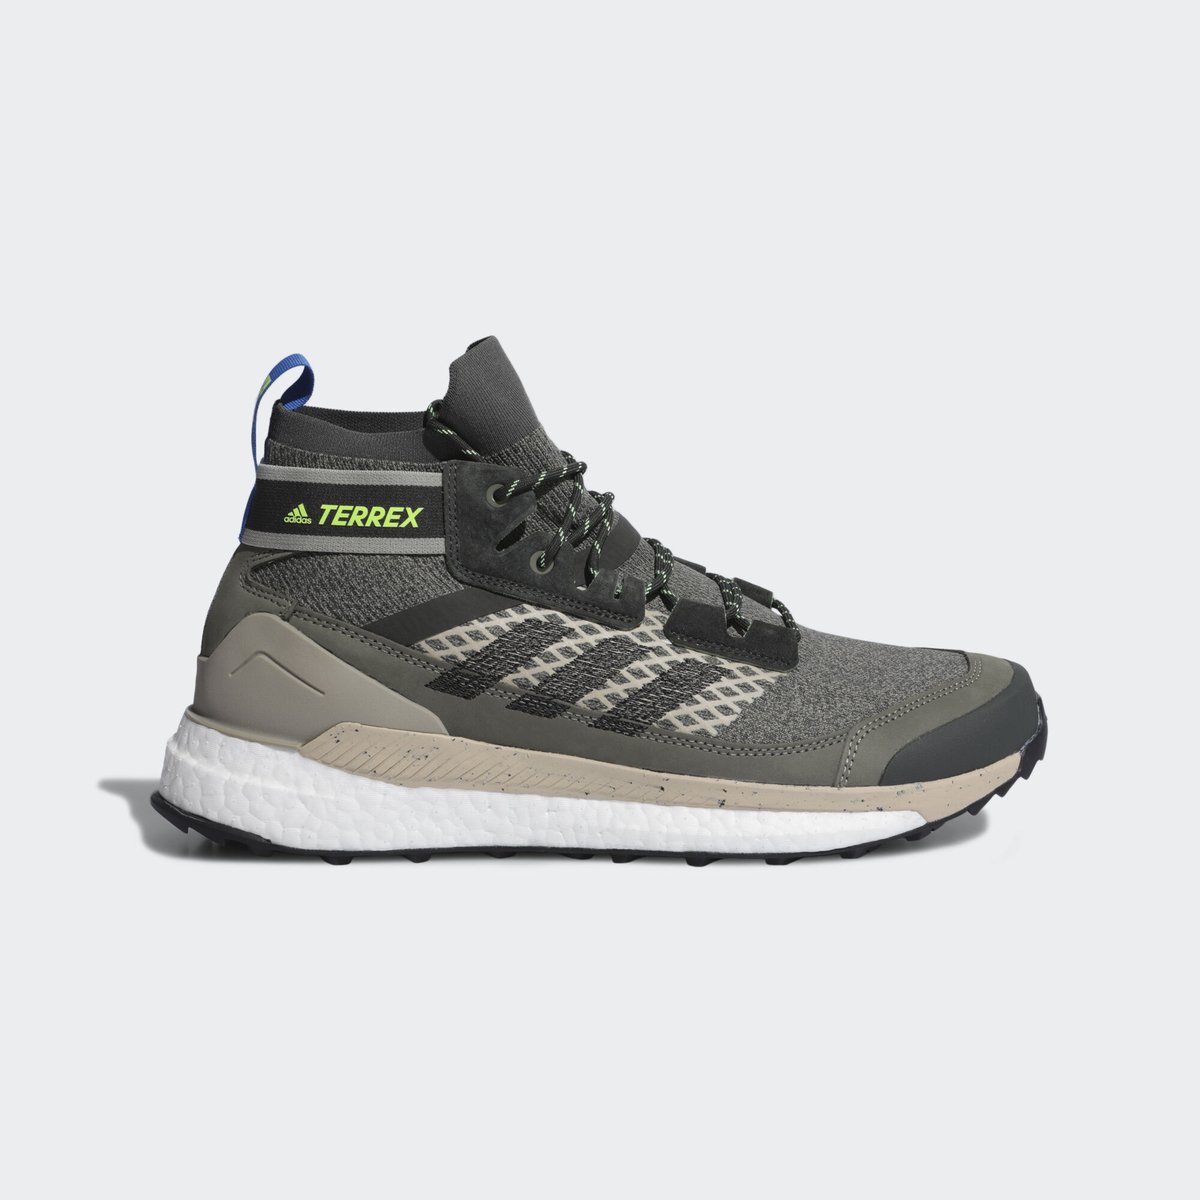 40% OFF on  #adidas US.adidas TERREX Free Hiker.Retail $200. Now $120 shipped.—>  https://bit.ly/2XfSKUg   #ad